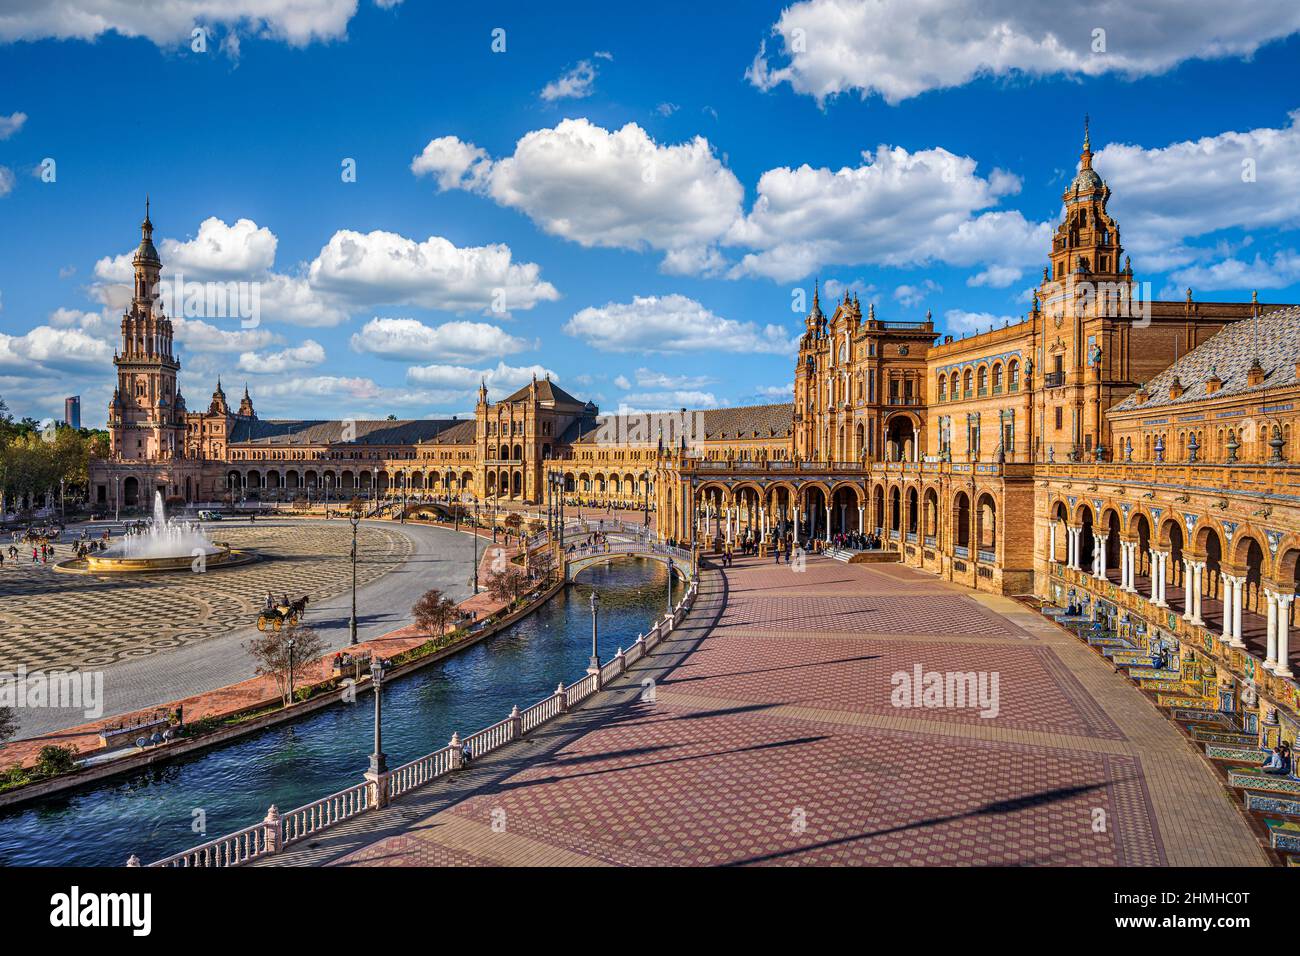 Plaza de Espana in Seville, Andalusia, Spain on a sunny day Stock Photo